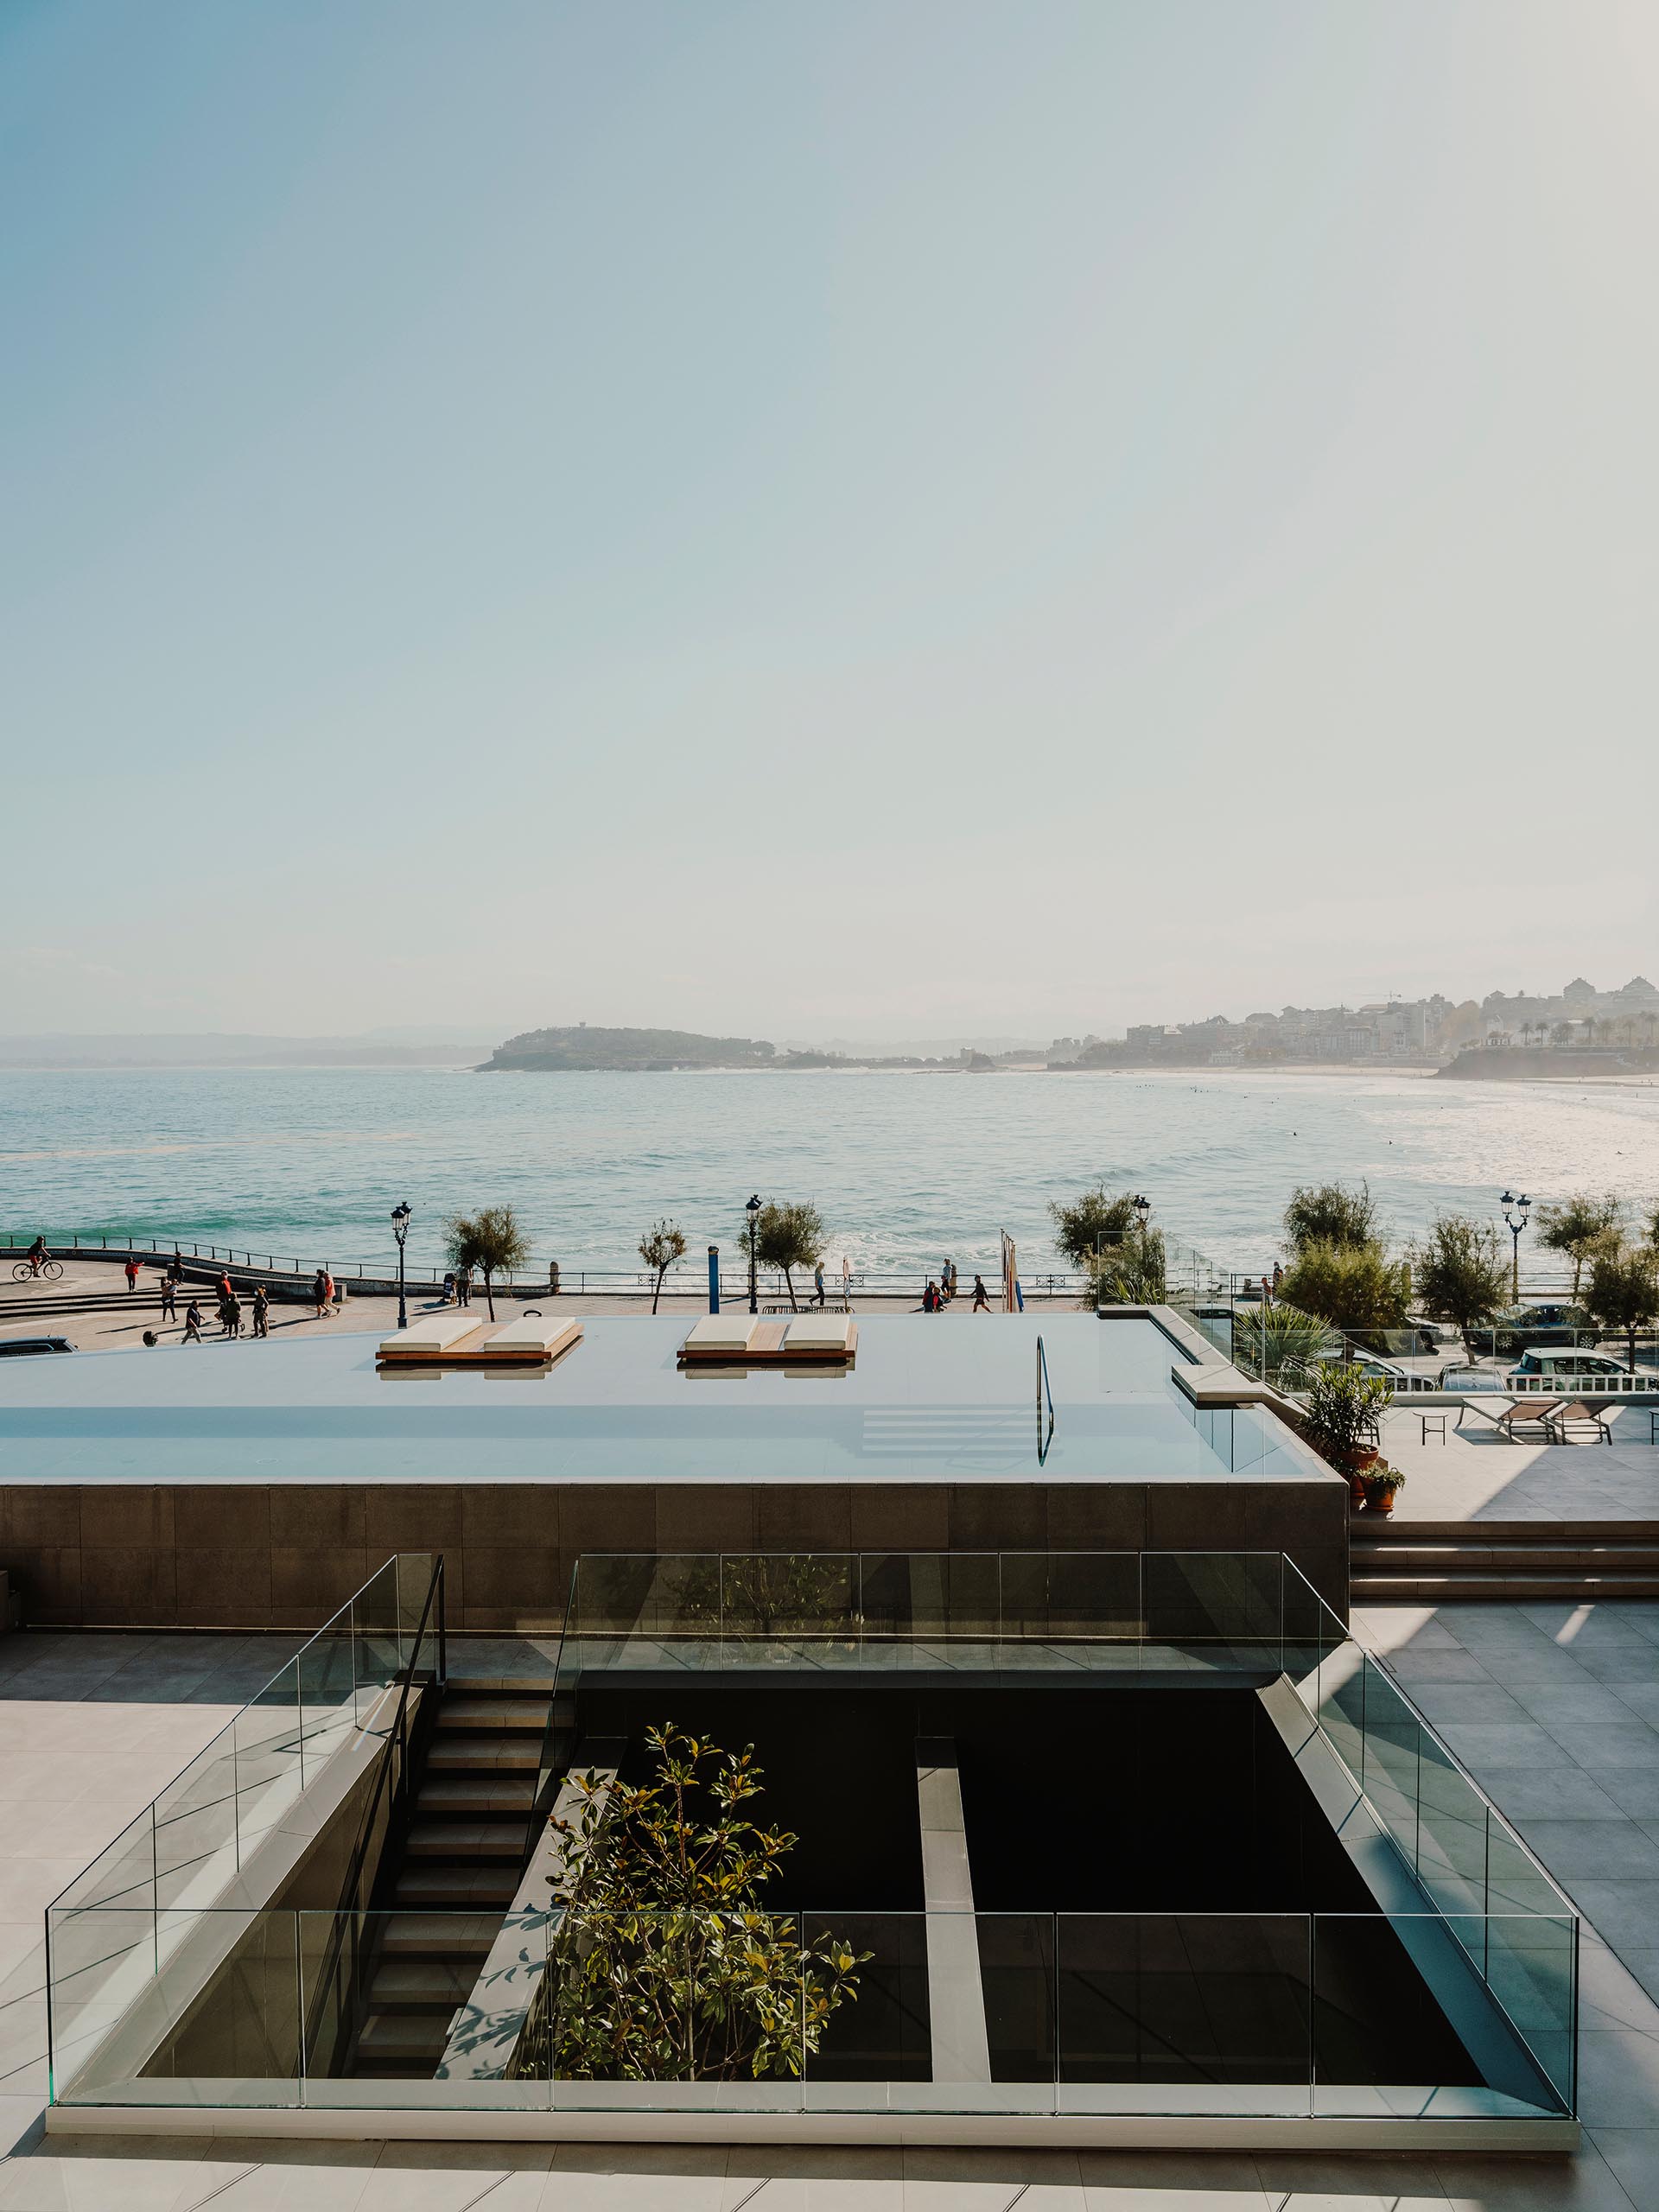 A modern hotel in Spain with a variety of levels dedicated to outdoor spaces and an infinity edge swimming pool.